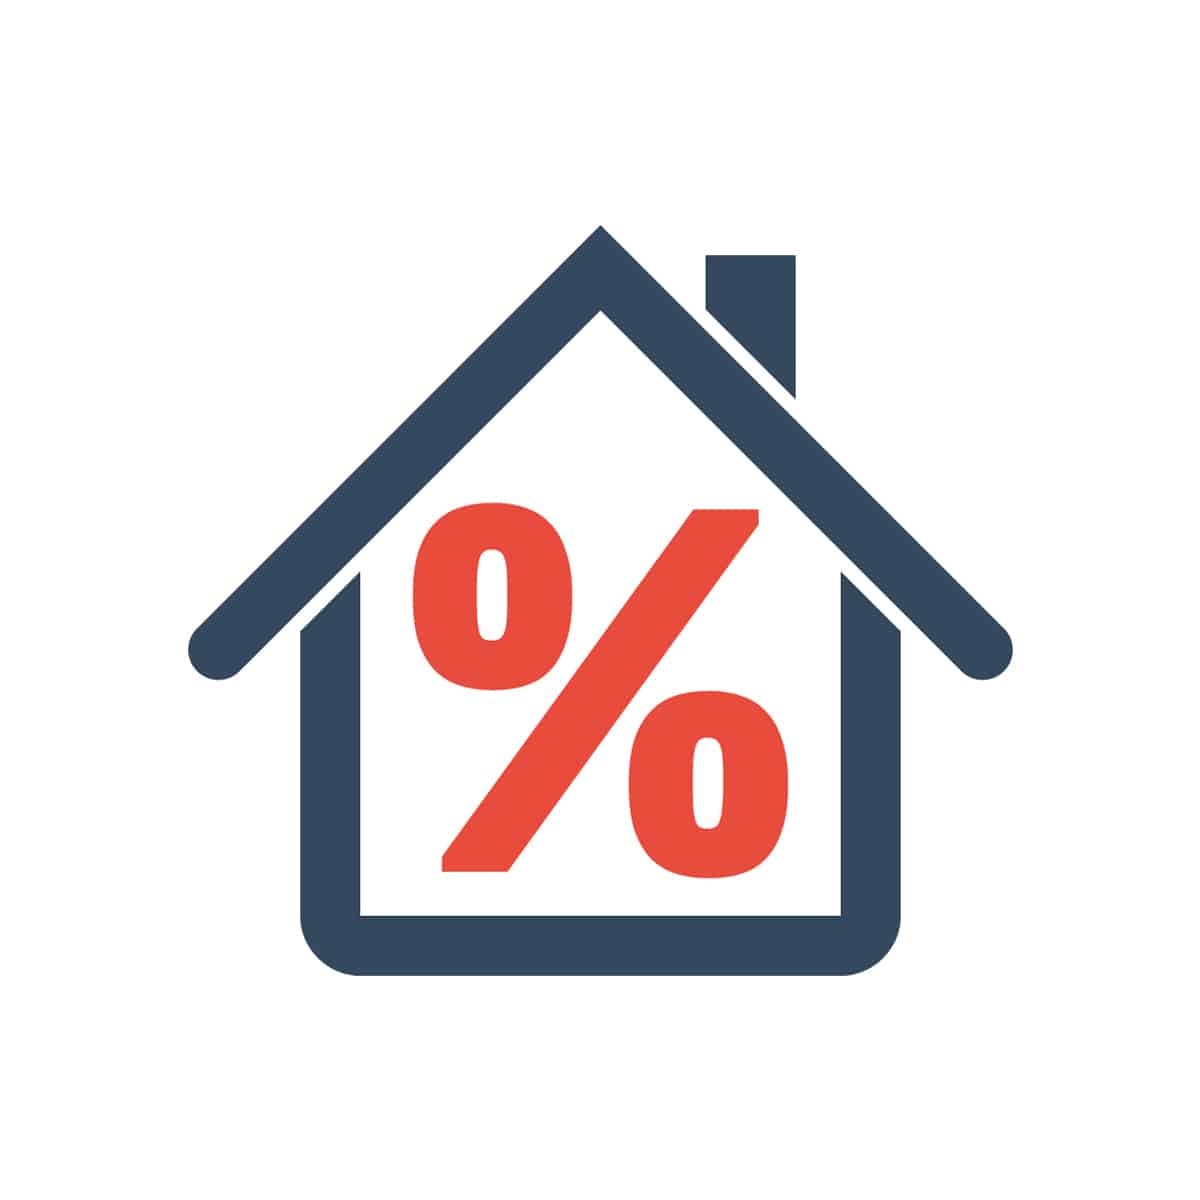 mortgage rates are on the rise, how will this affect your home buying power?